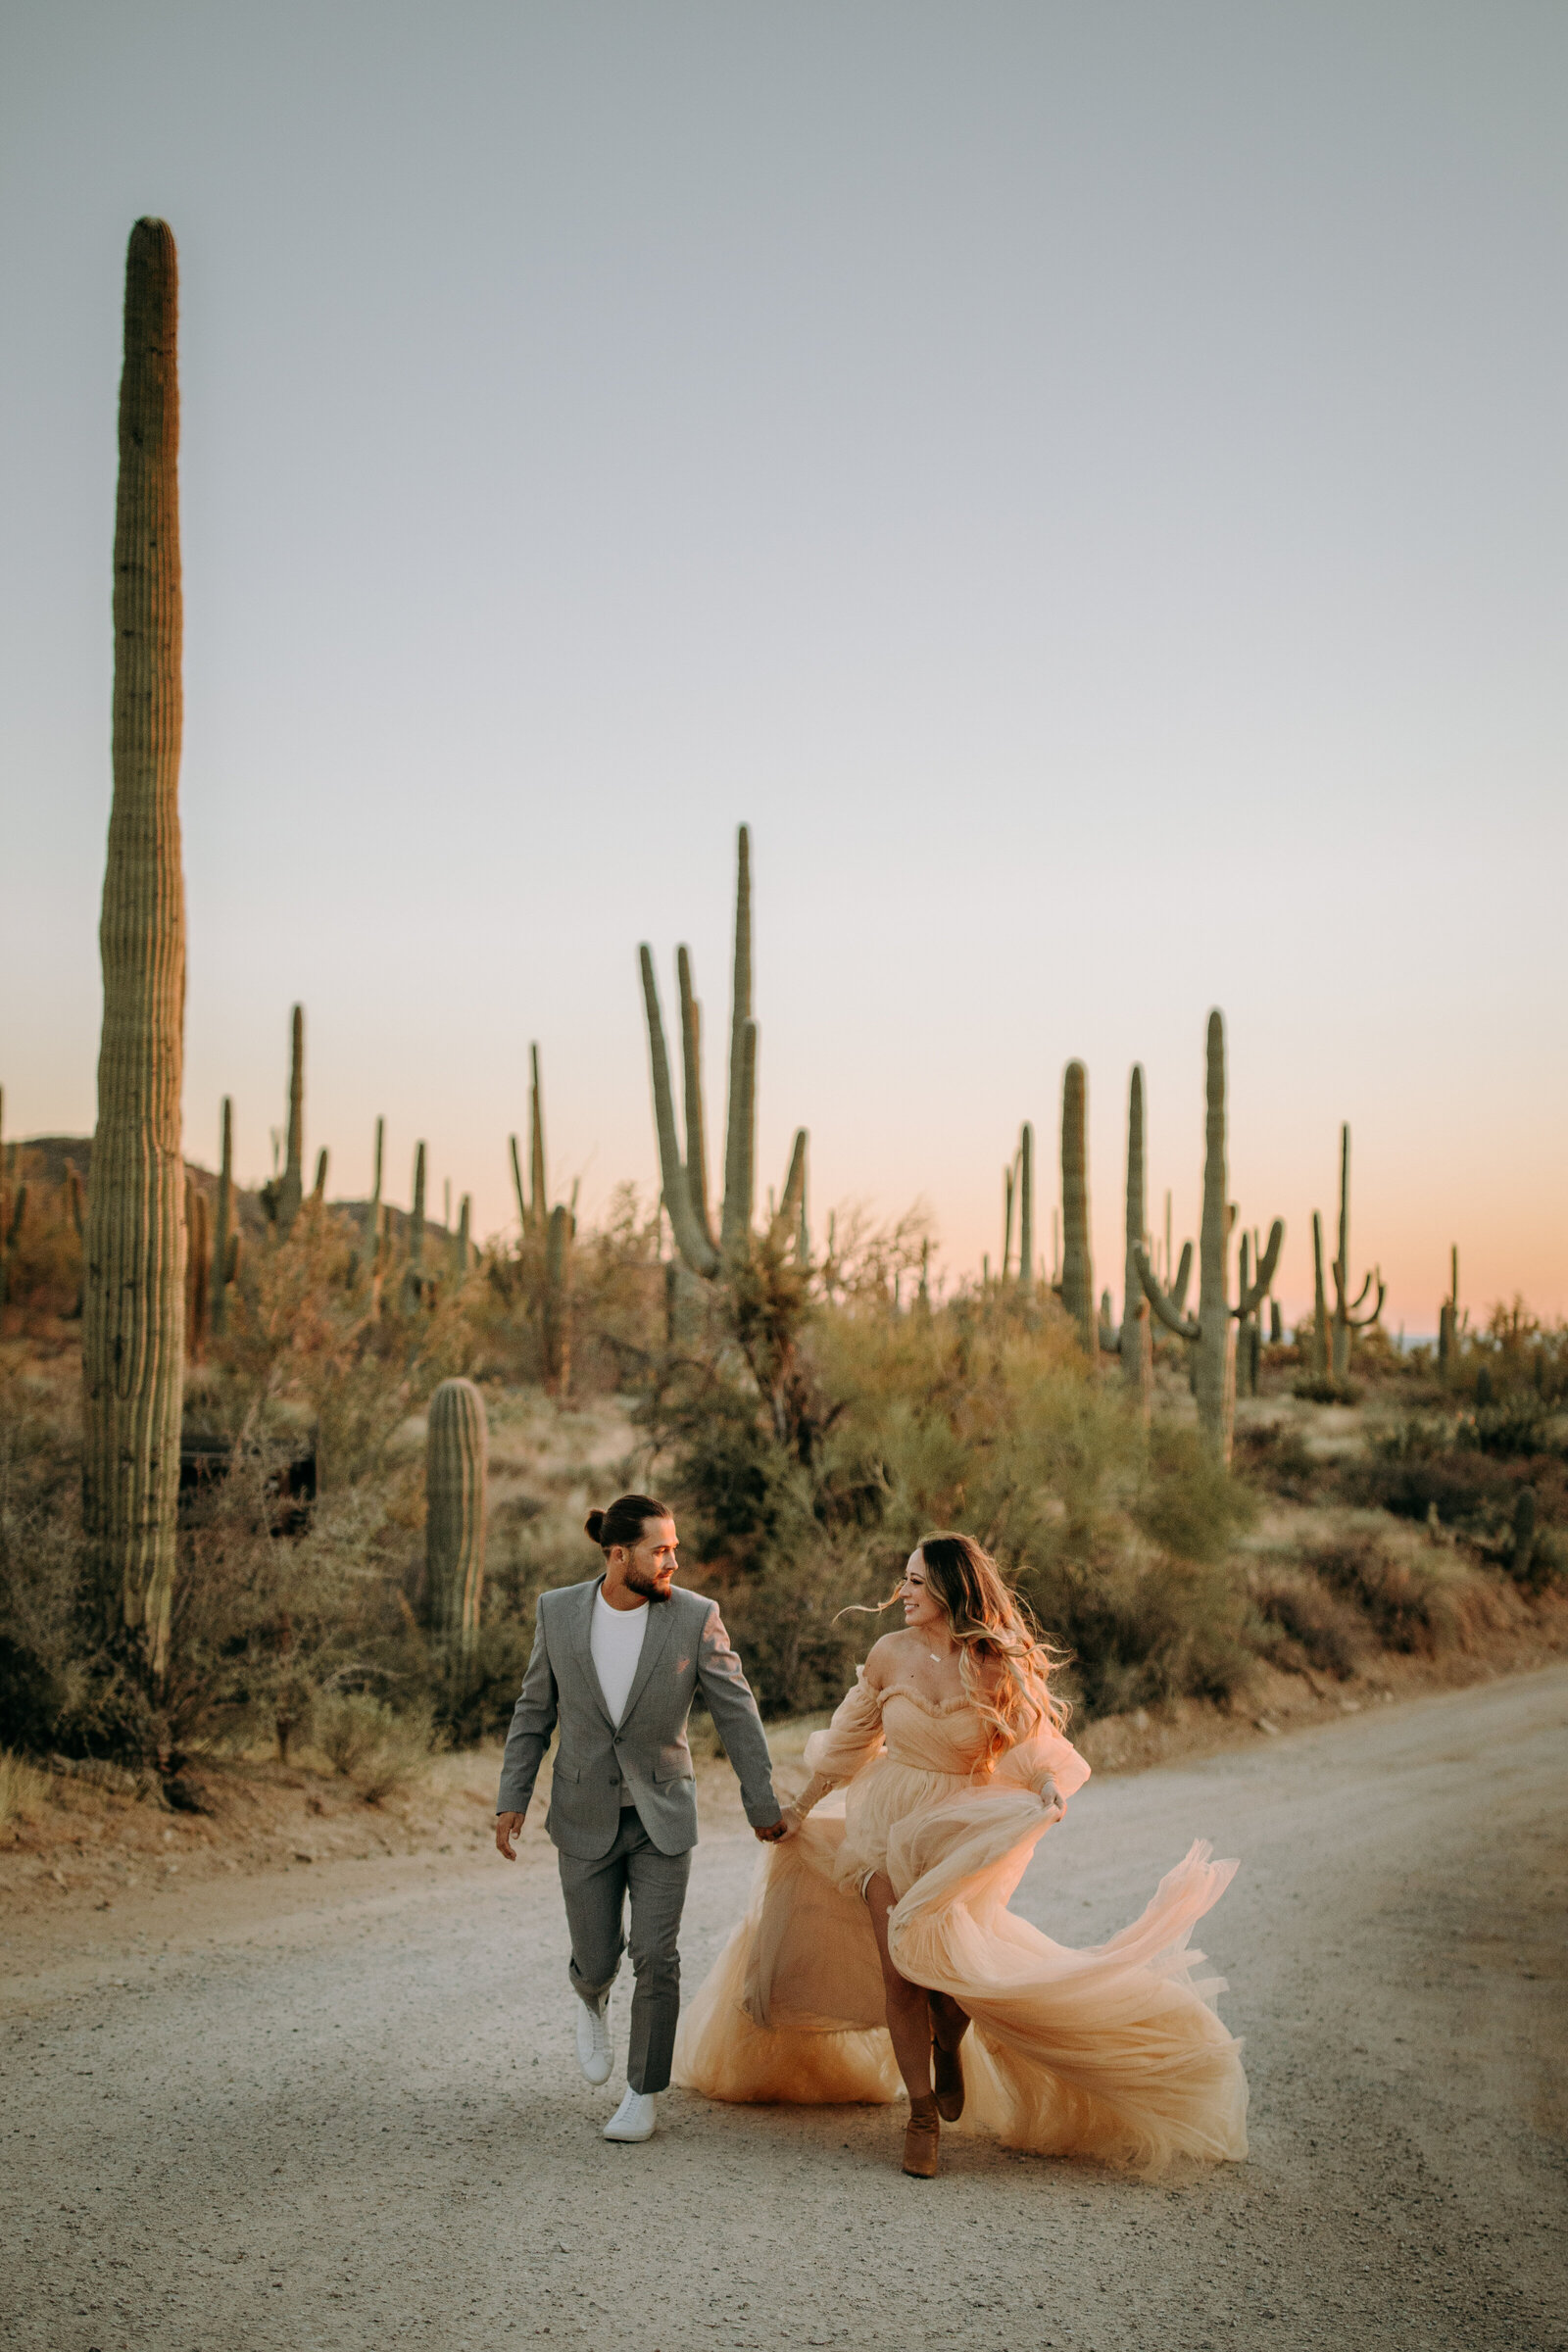 Couple running towards camera in suit and dress with cactus in the desert